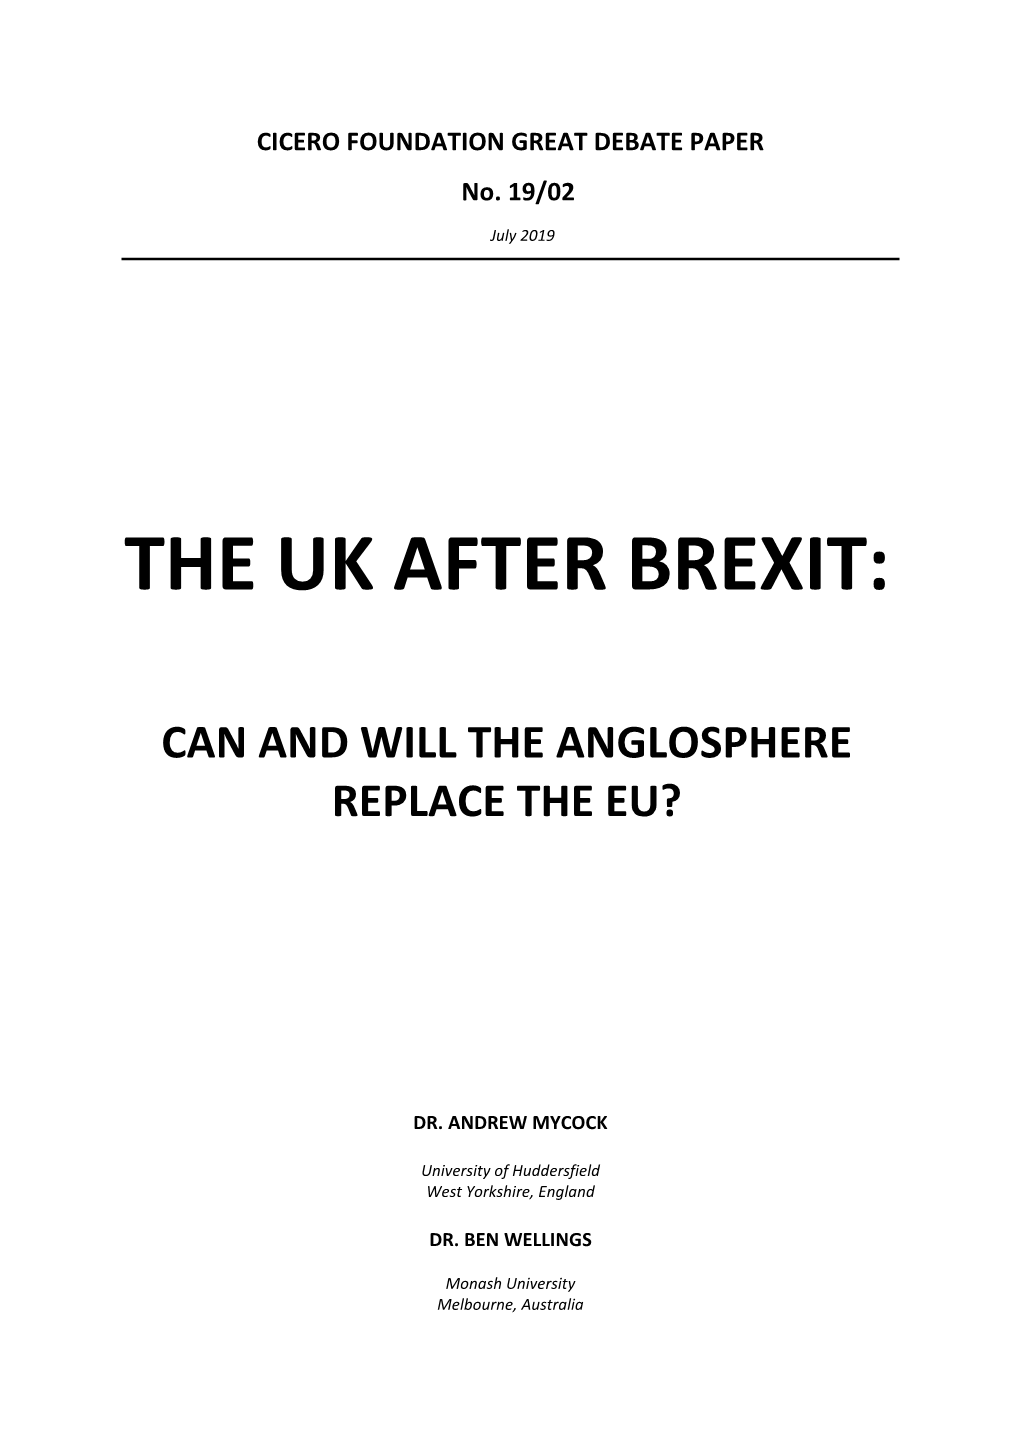 The Uk After Brexit: Will and Can the Anglosphere Replace The